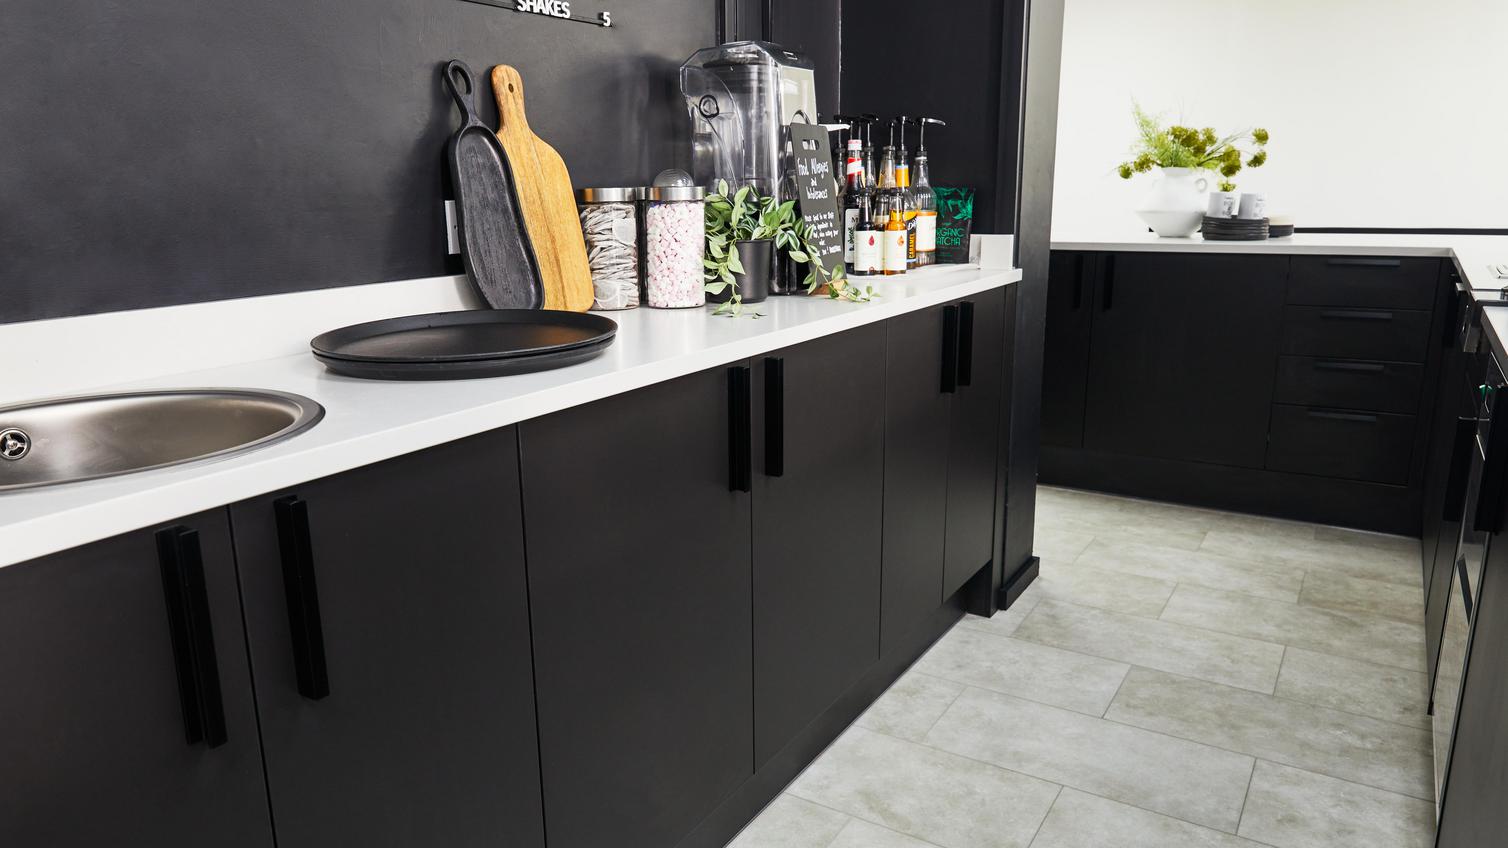 Jill Scott Cafe Kitchen Makeover featuring a black, slab kitchen with a smooth finish. Includes white worktops and tile floors